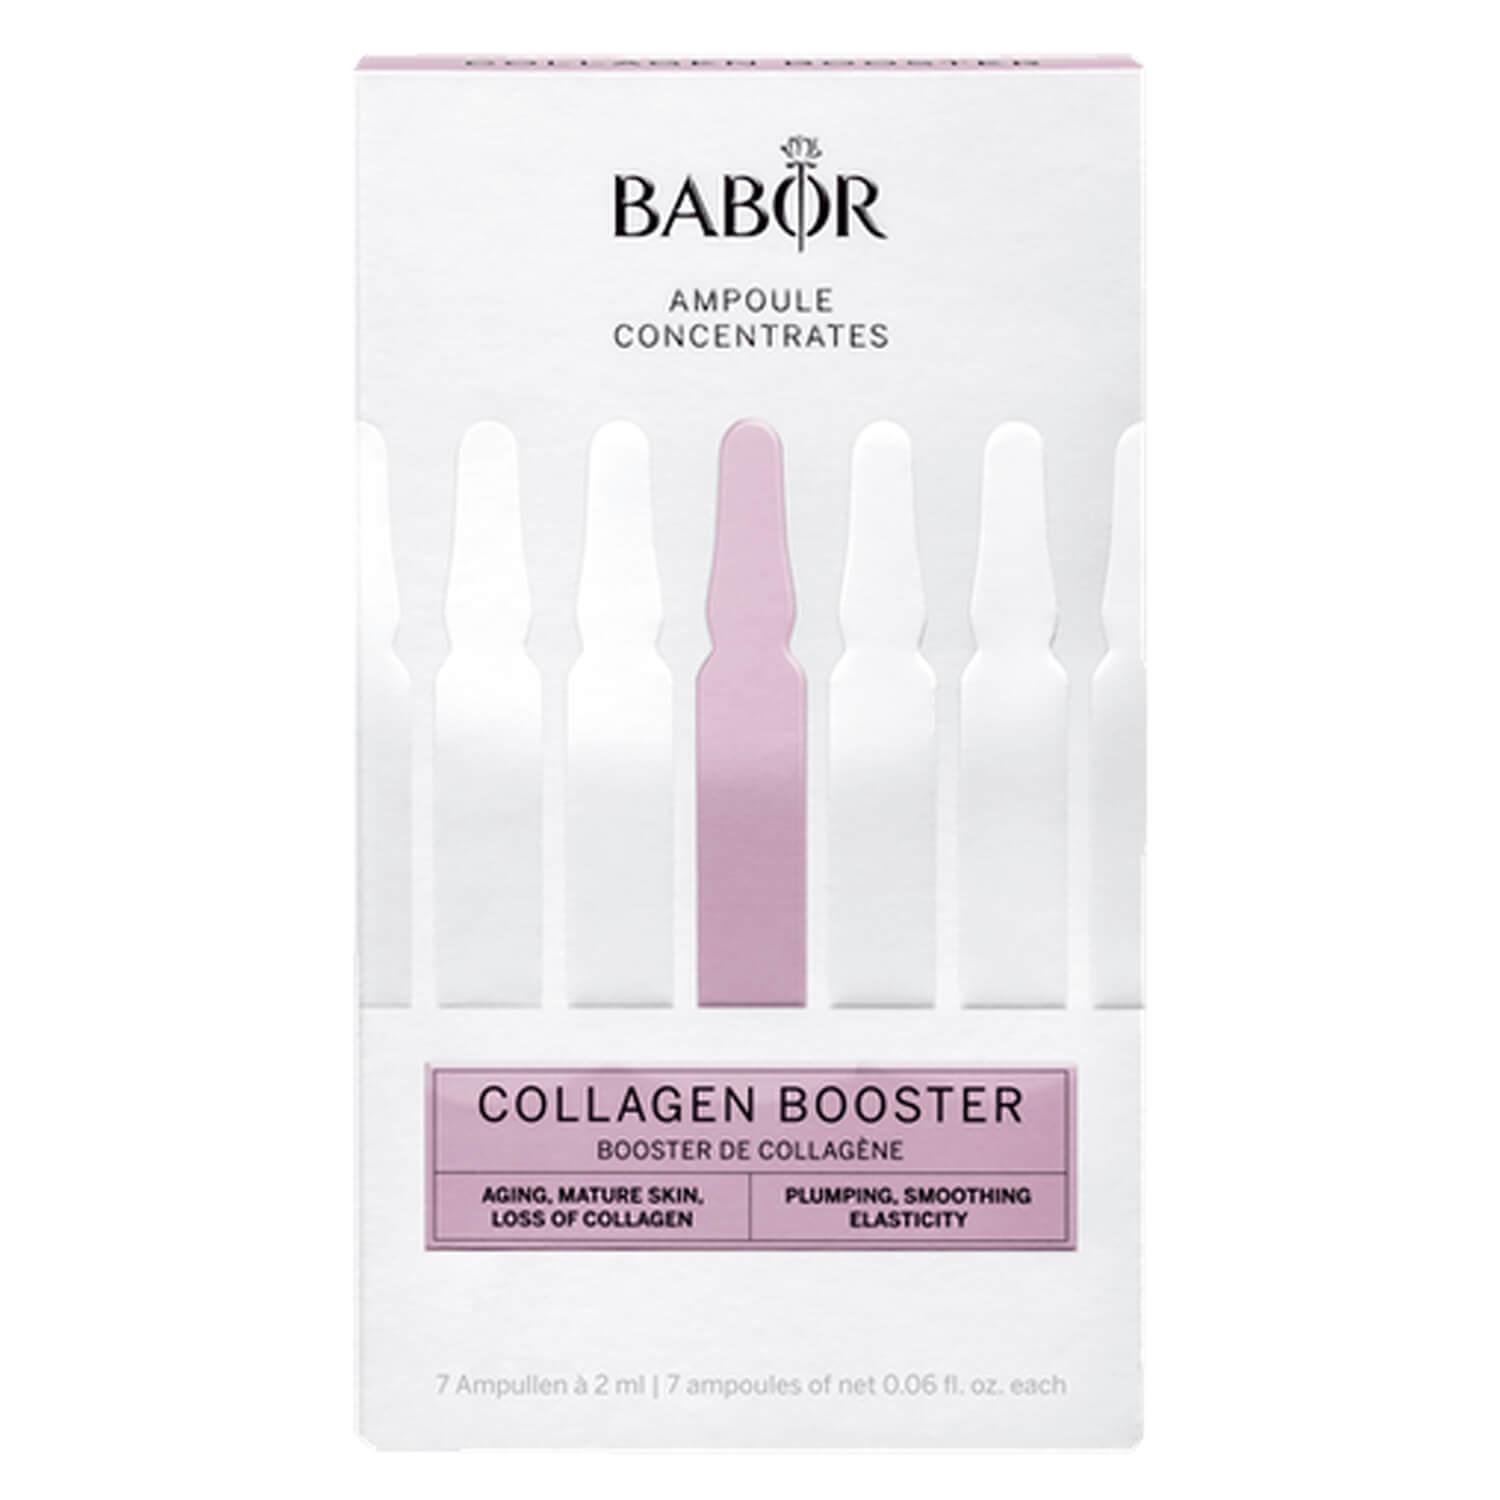 BABOR AMPOULE CONCENTRATES - Collagen Booster